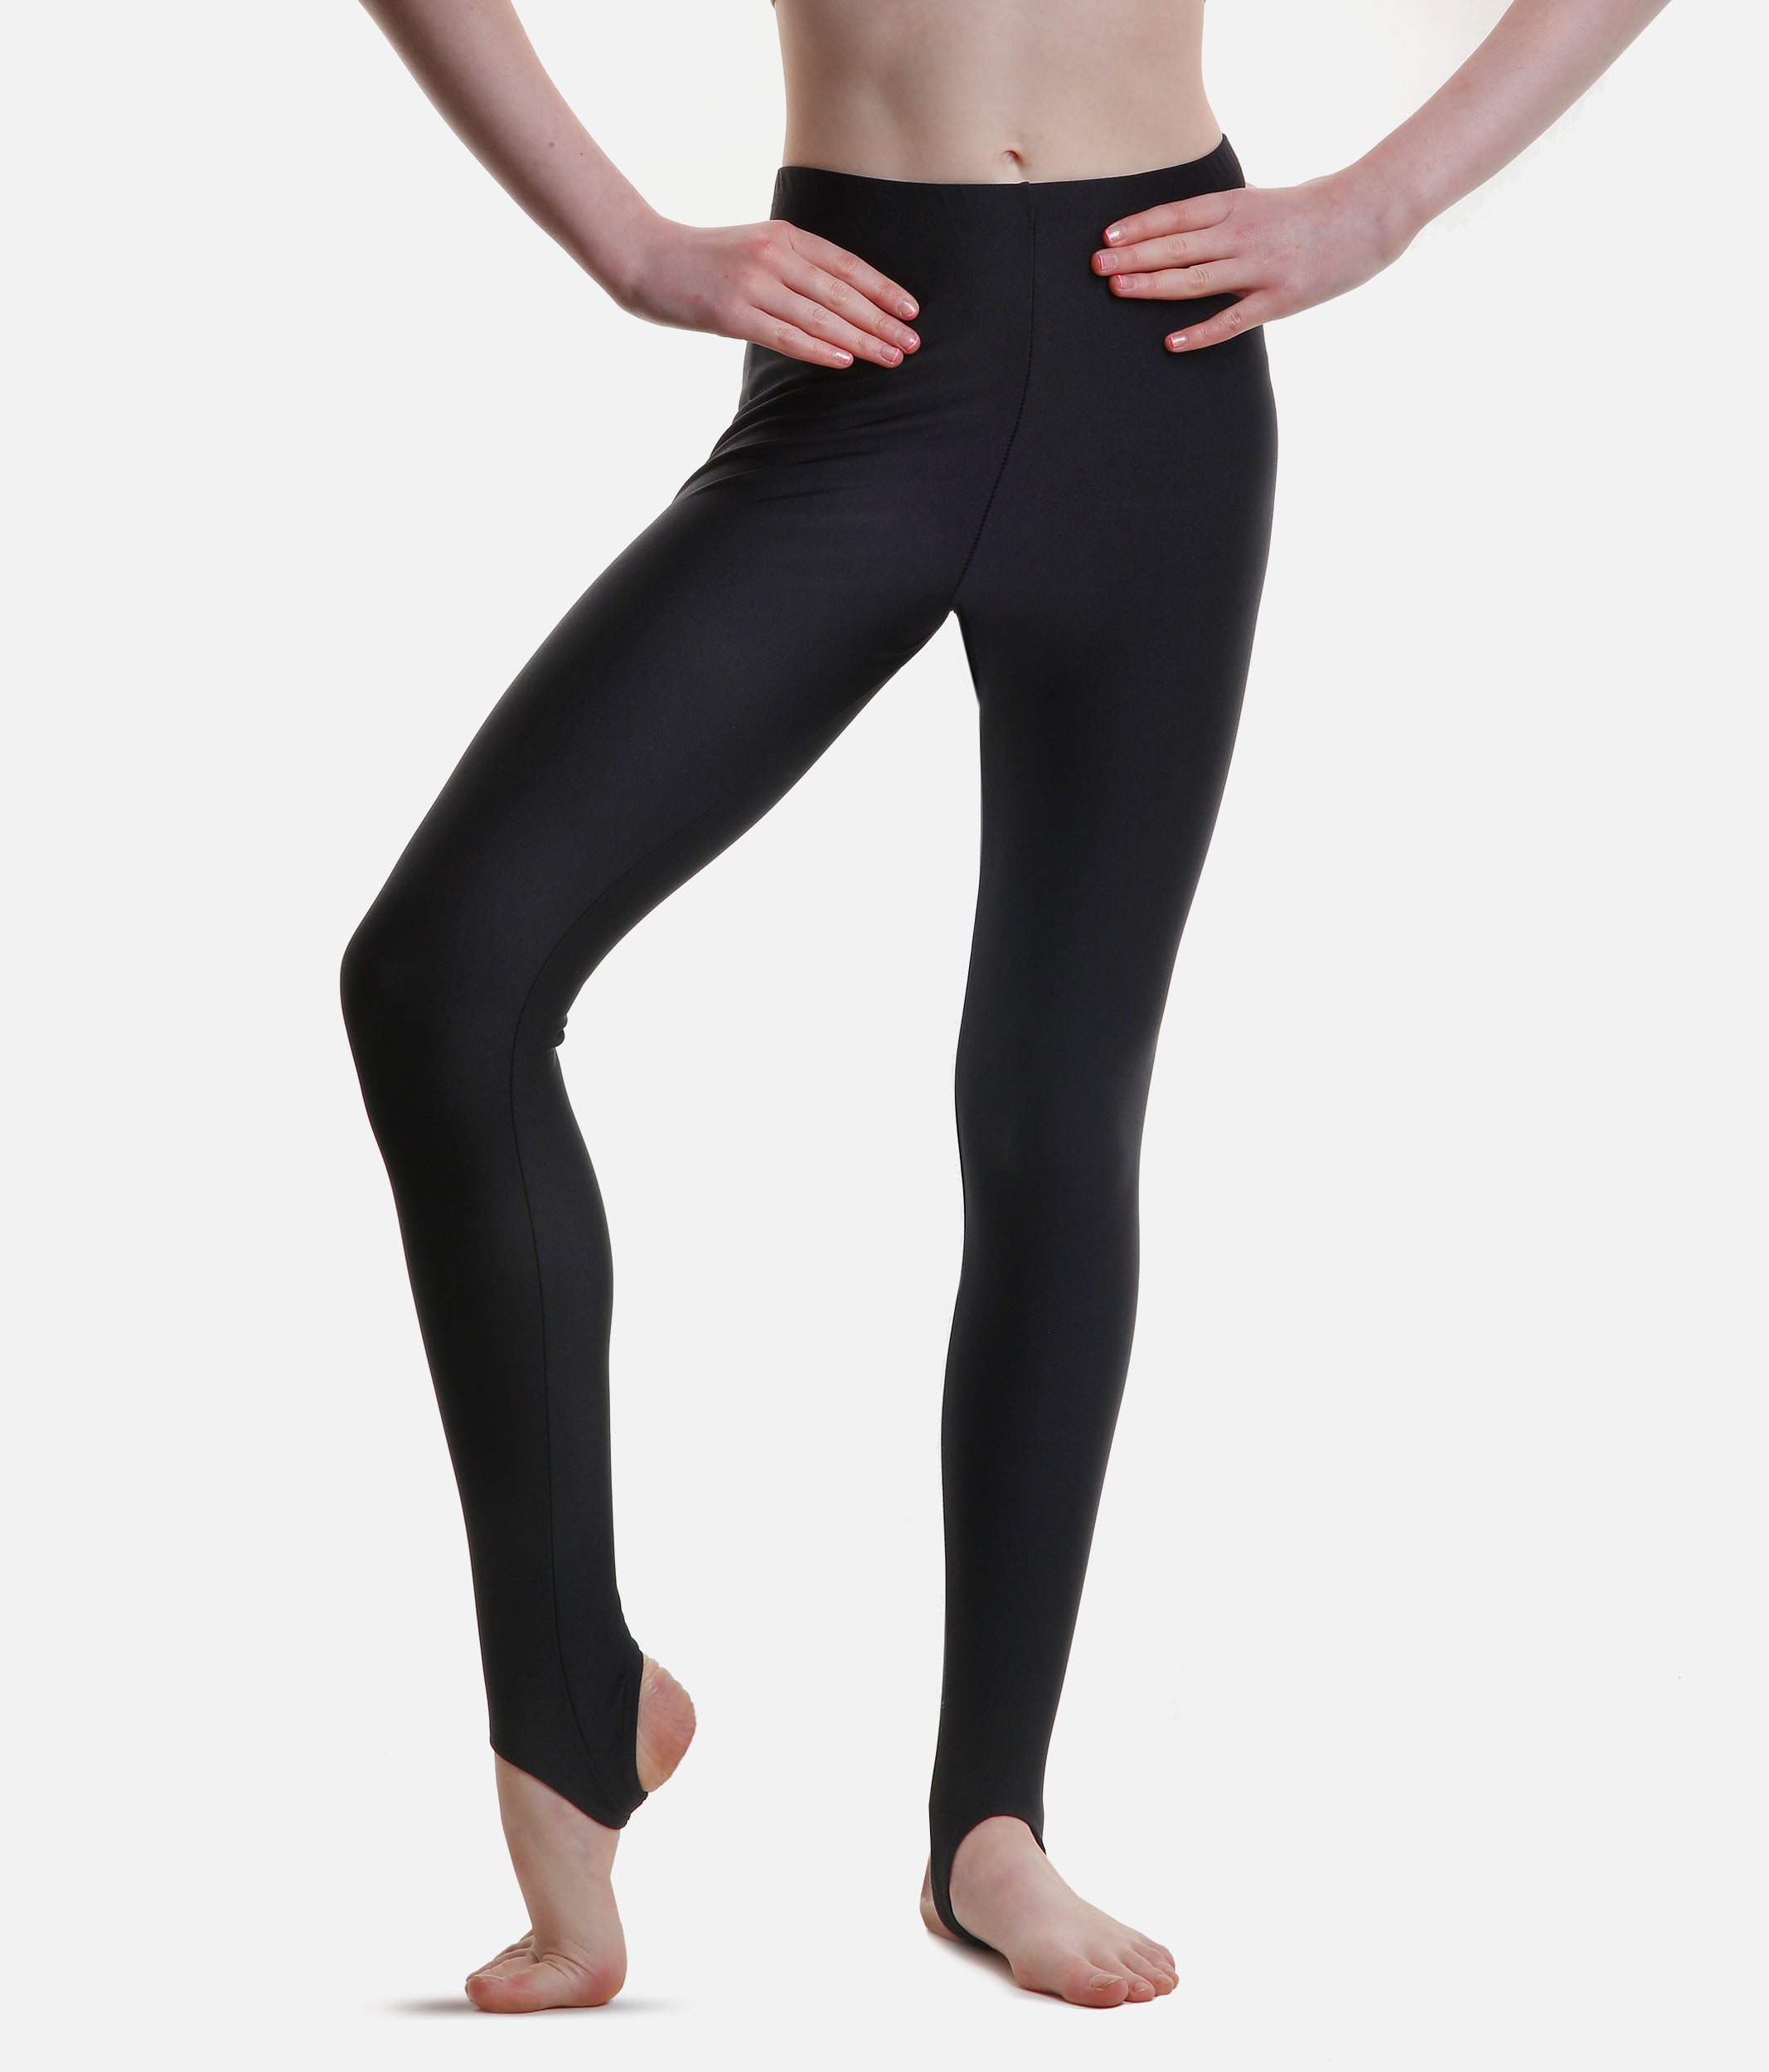 Cool Wholesale Women Shiny Spandex Leggings Pics In Any Size And Style 